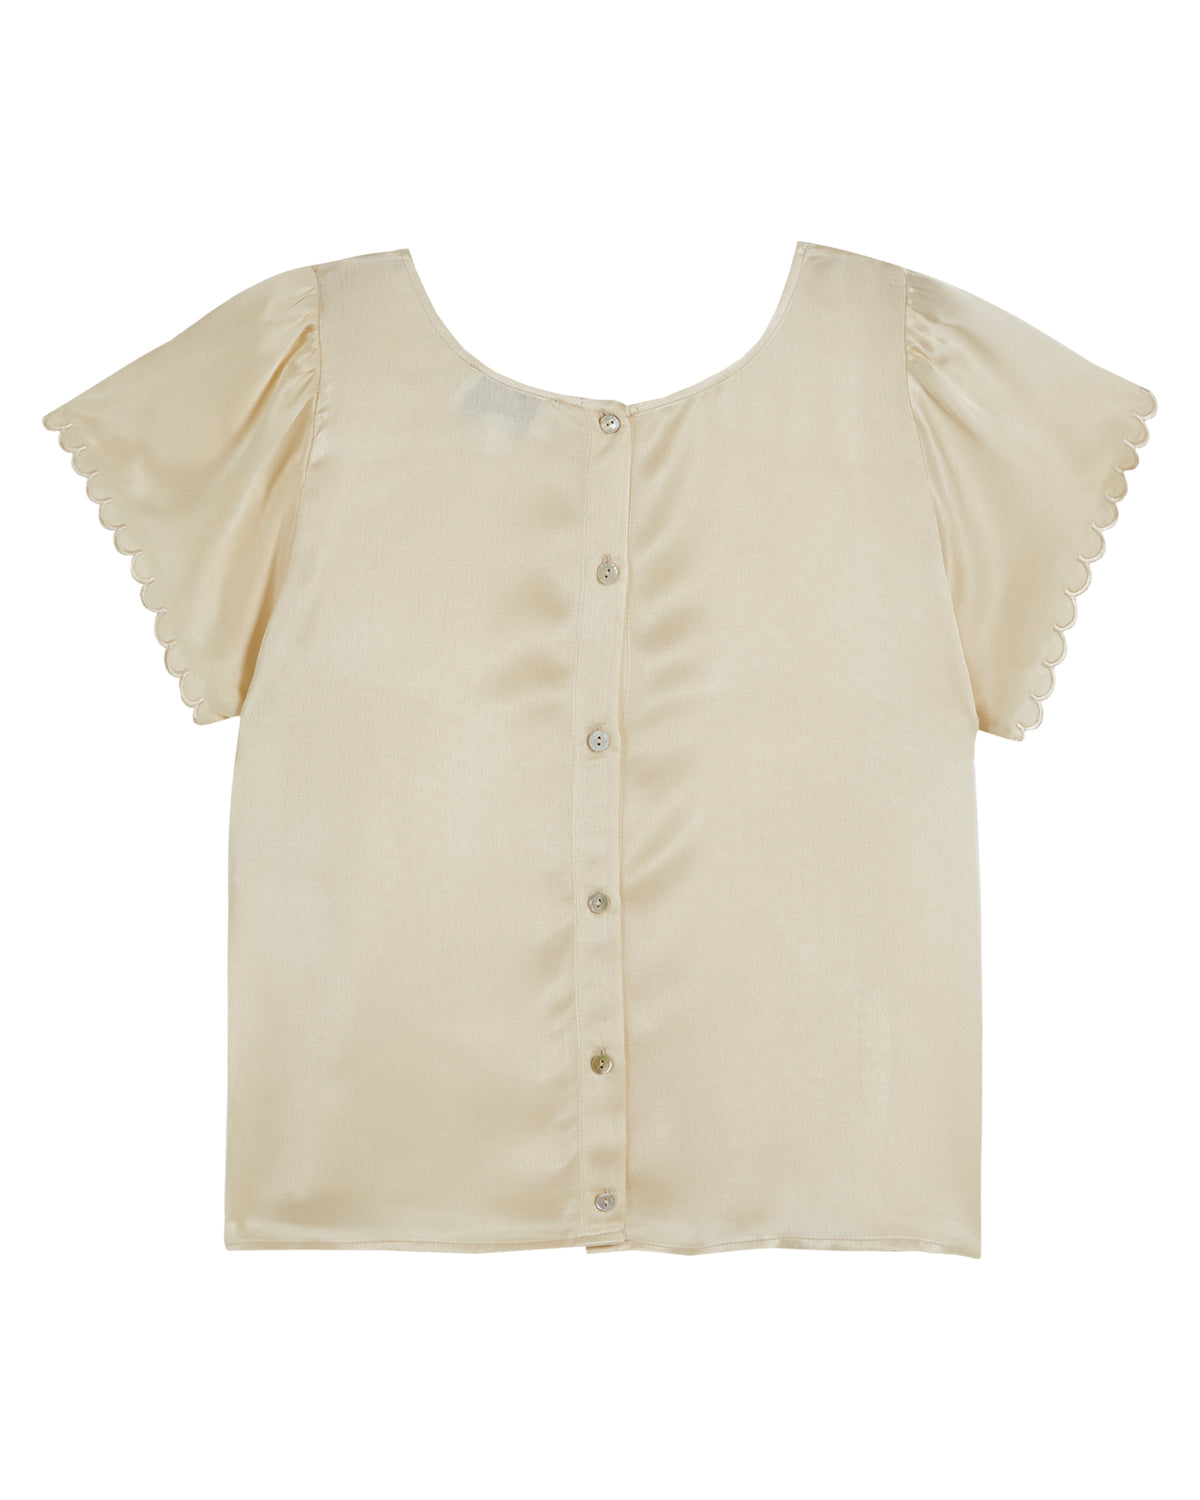 Satin short sleeved top with rear button fastening and scalloped neckline and cuffs